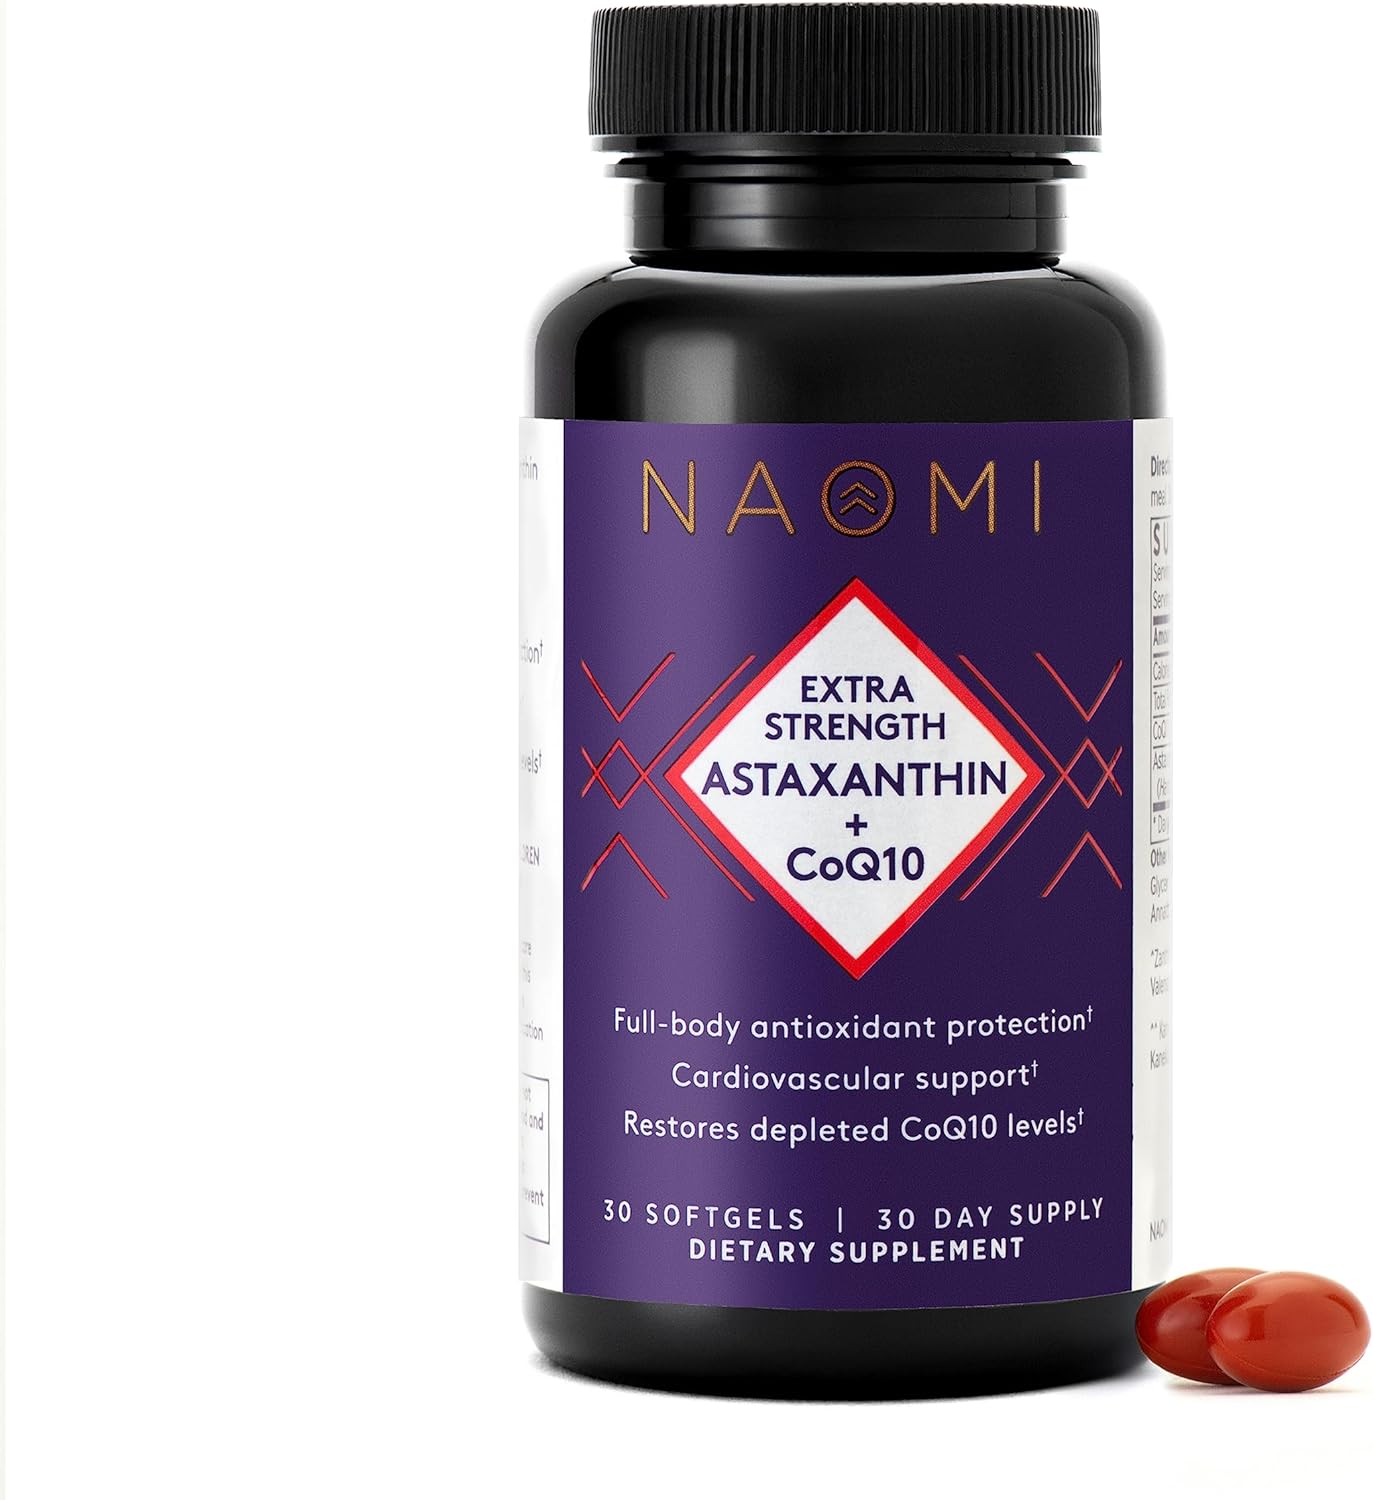 NAOMI Extra Strength Astaxanthin + CoQ10, Fat-Soluble Antioxidants, Cardiovascular Support, Increased Energy, Immune and Cognitive Function, Restore Depleted CoQ10, High Absorption, 30-Day Supply